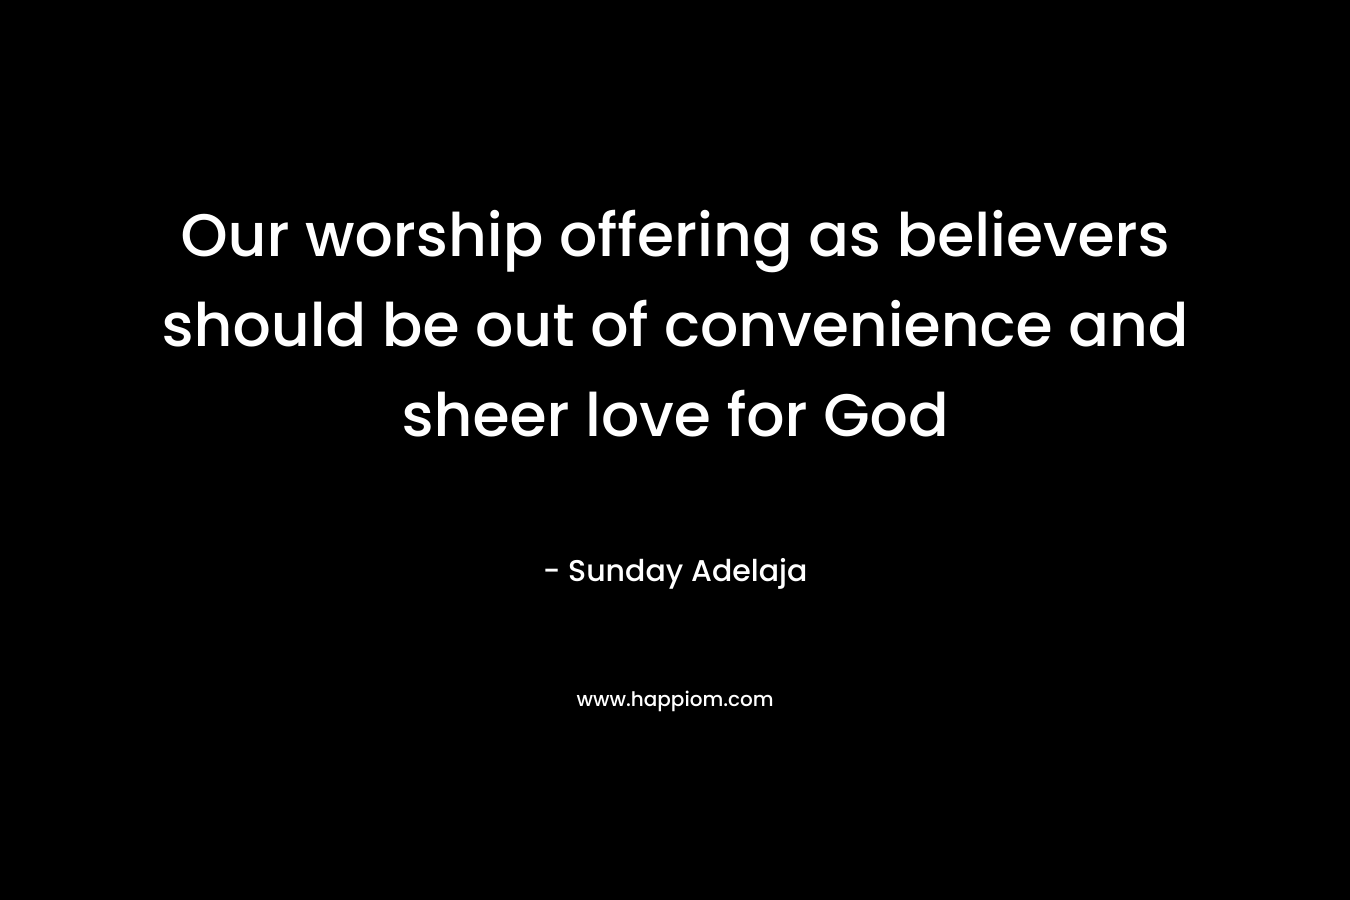 Our worship offering as believers should be out of convenience and sheer love for God